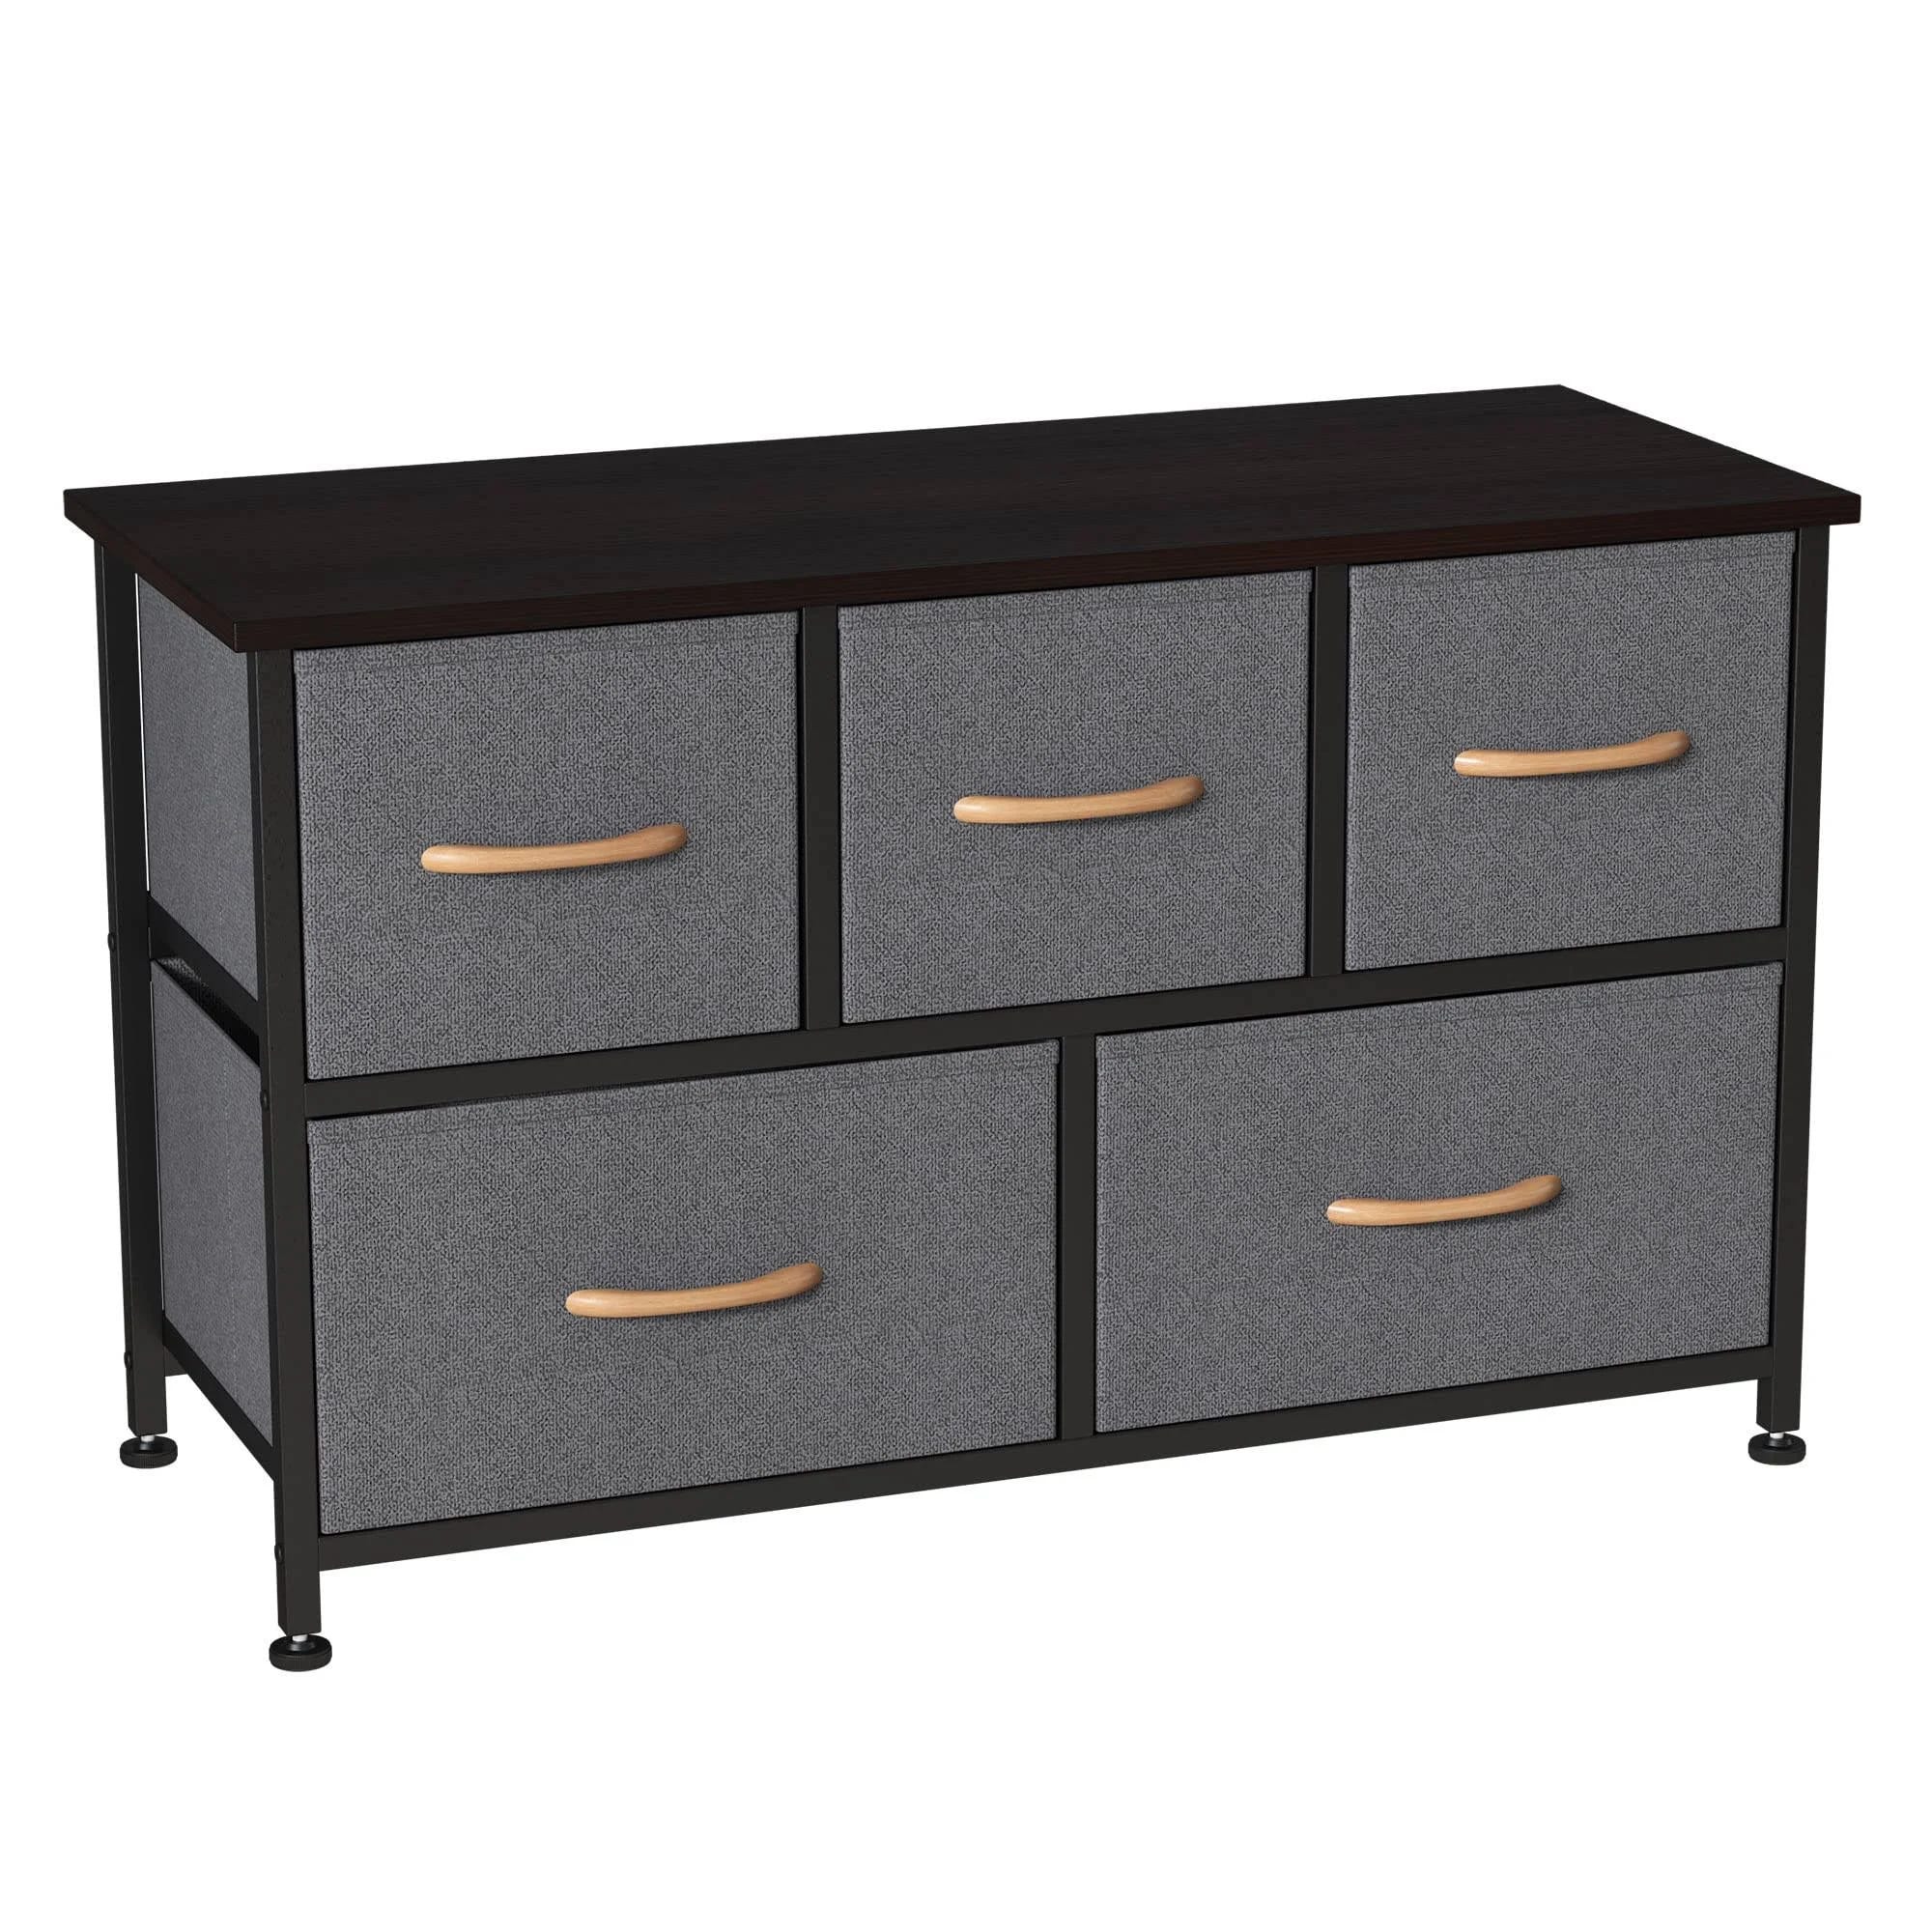 Spacious Fabric Dresser for Bedroom and Office Storage | Image